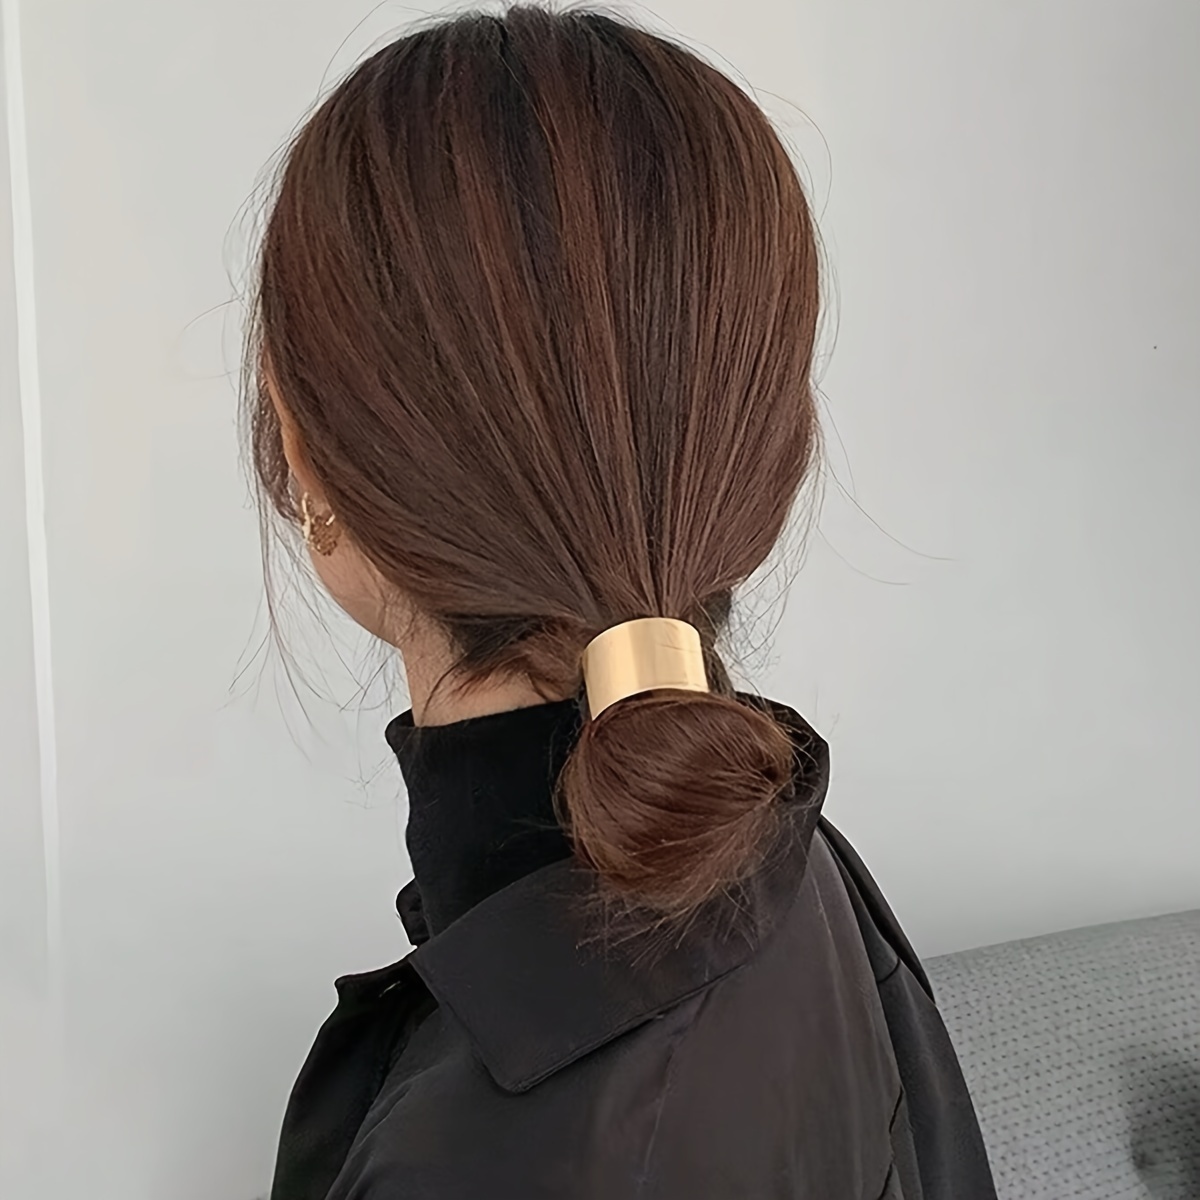 

1pc Elegant Hair Tie, Women's Vintage Style Ponytail Holder, Simple Chic Hairband Accessory